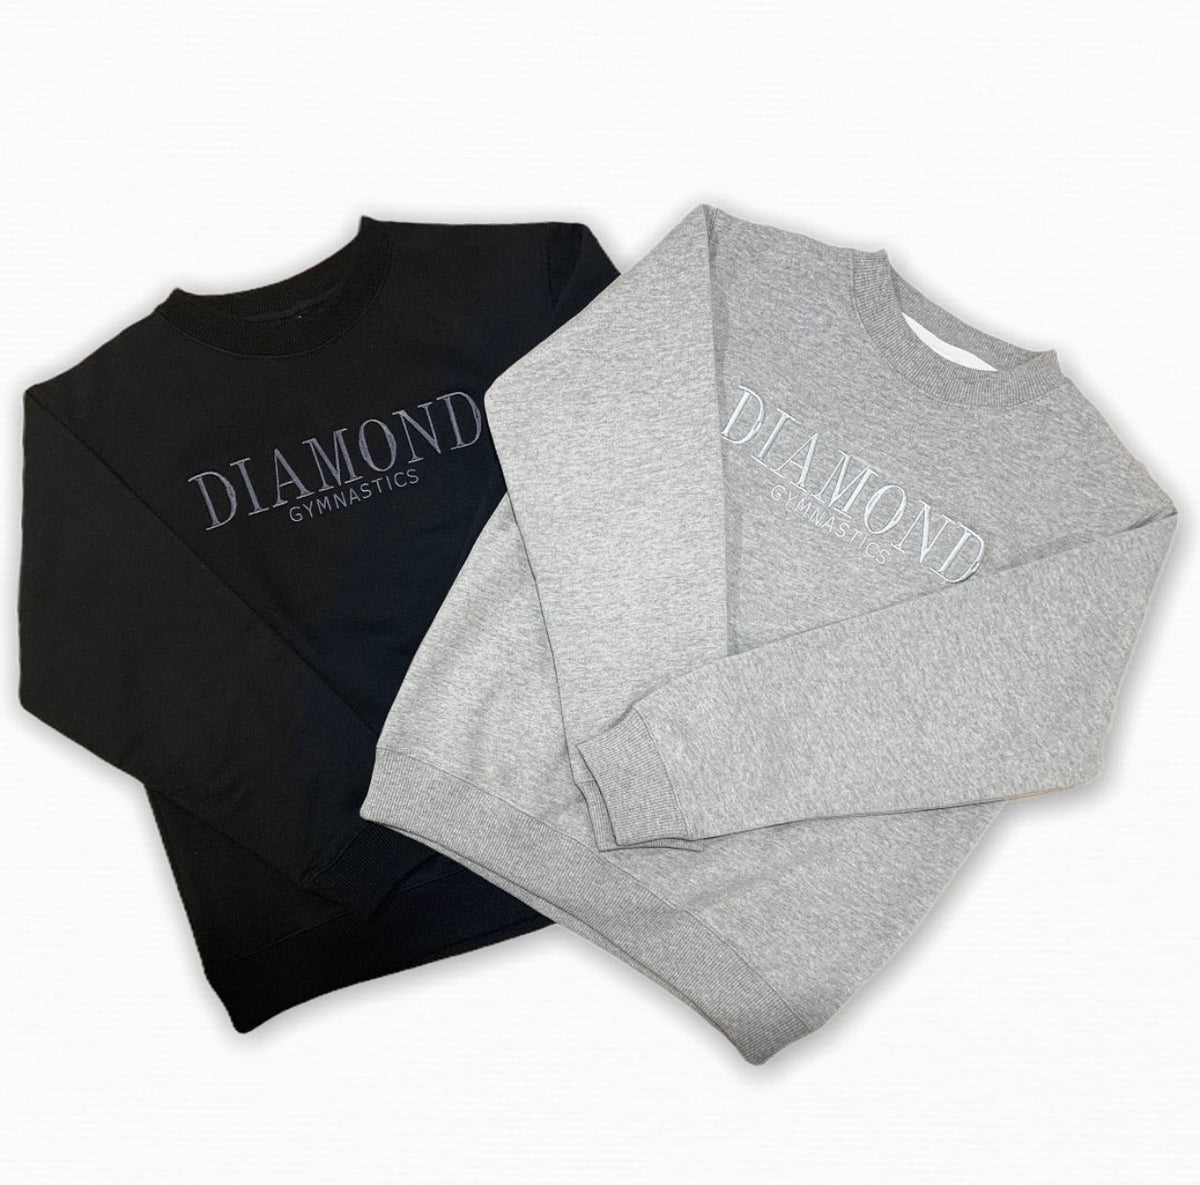 Embroidery on crew neck jumpers for Diamond Gymnastics